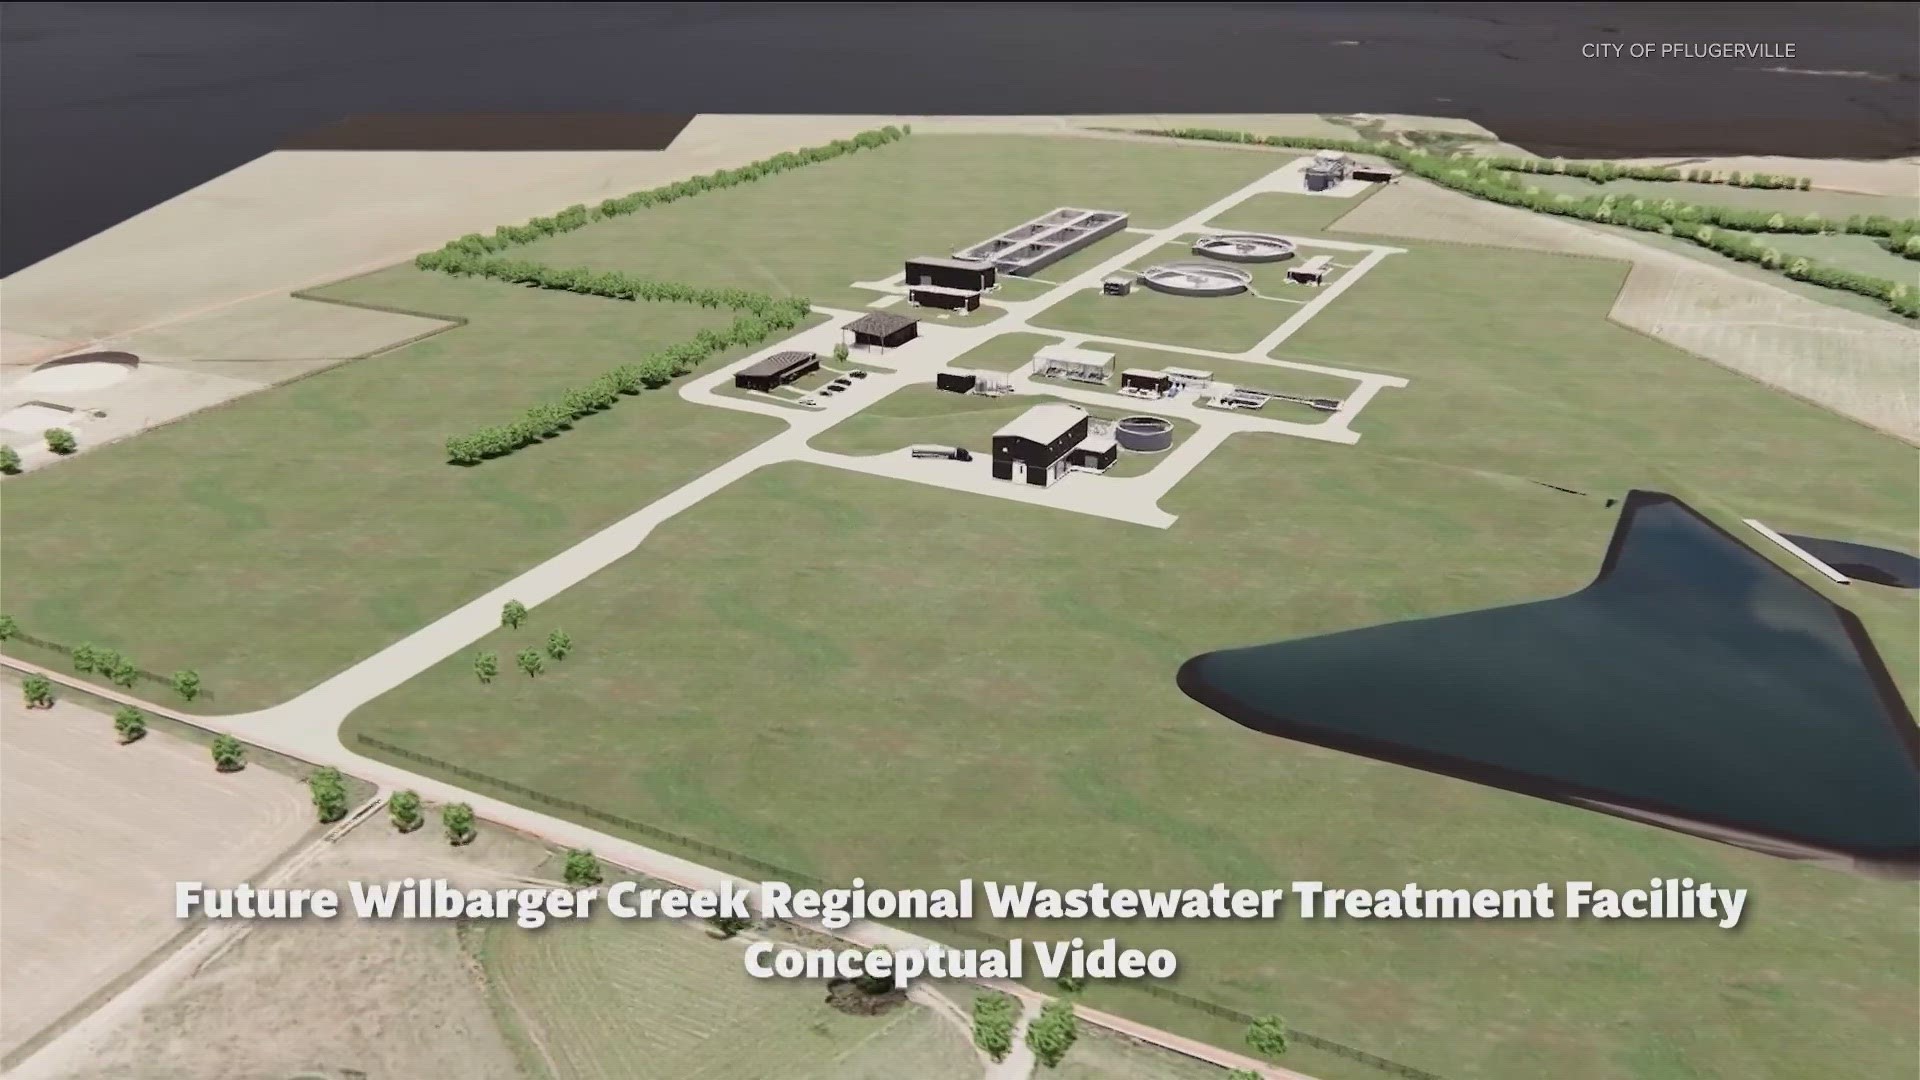 Pflugerville is getting ready to build more infrastructure to deal with growth.